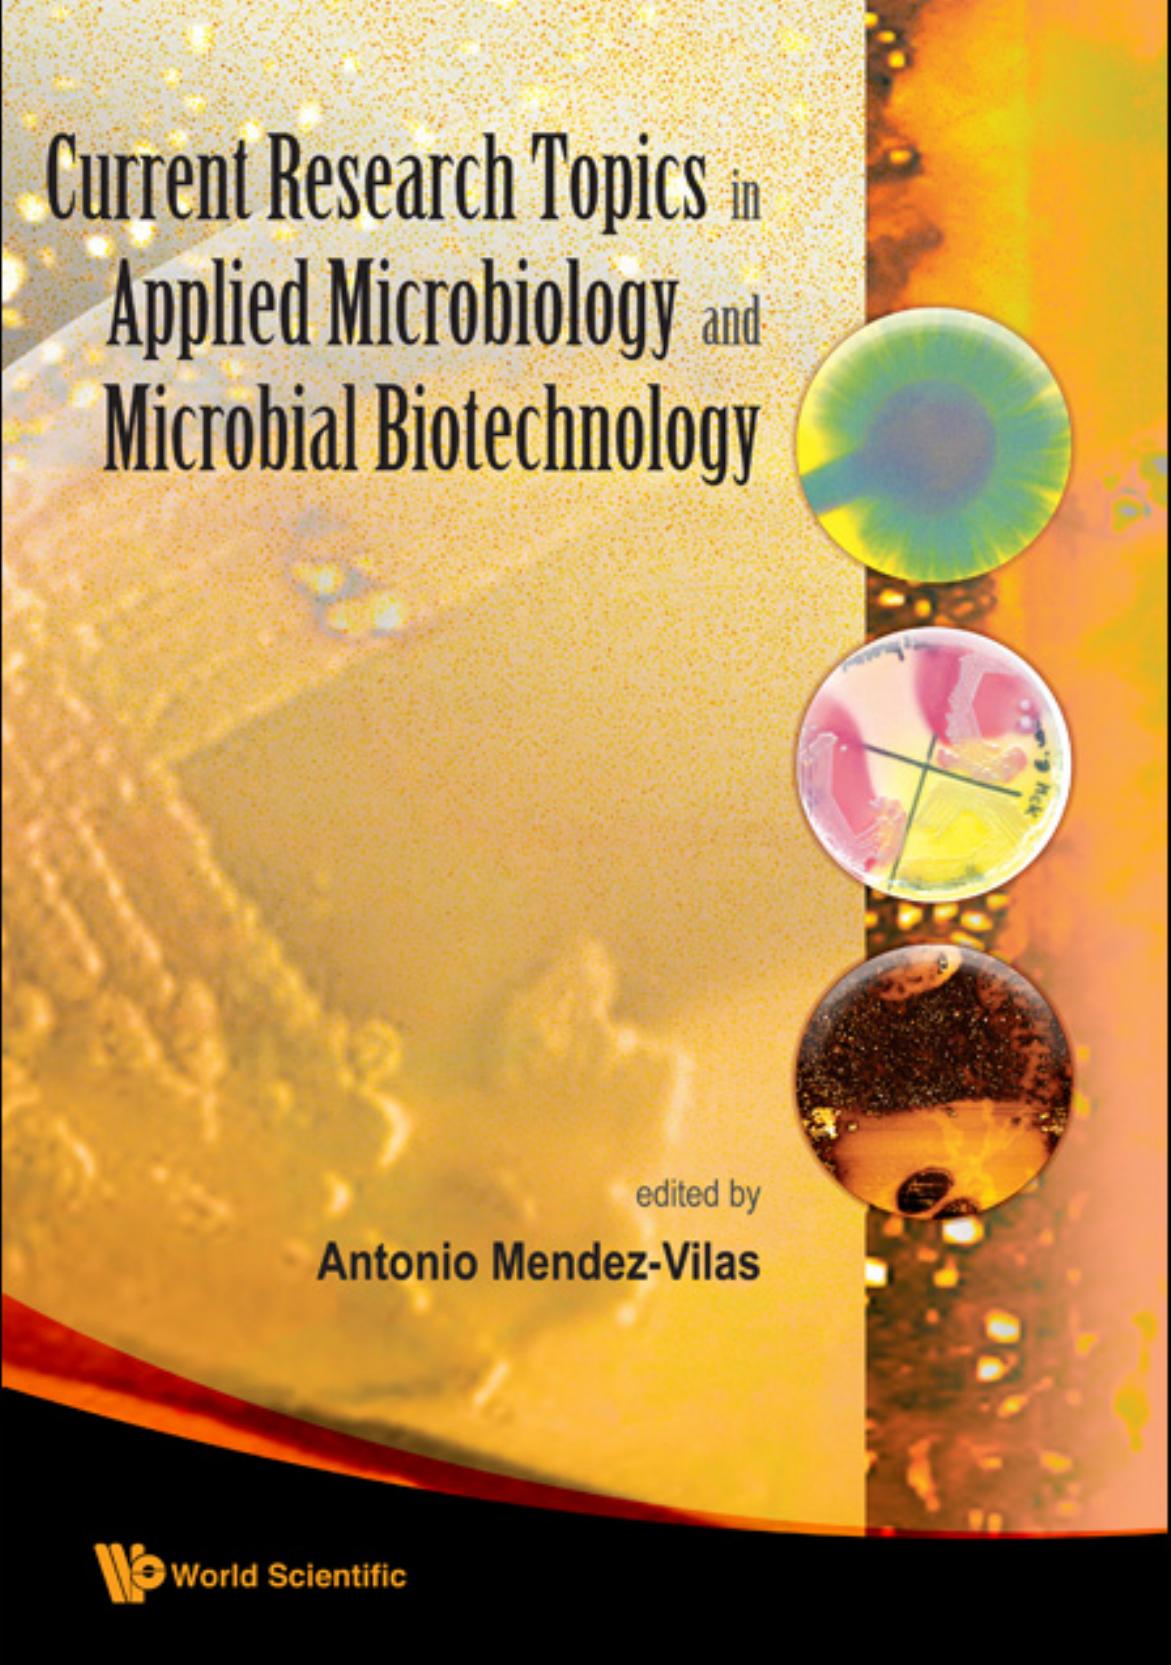 Current Research Topics in Applied Microbiology and Microbial Biotechnology (787 Pages)